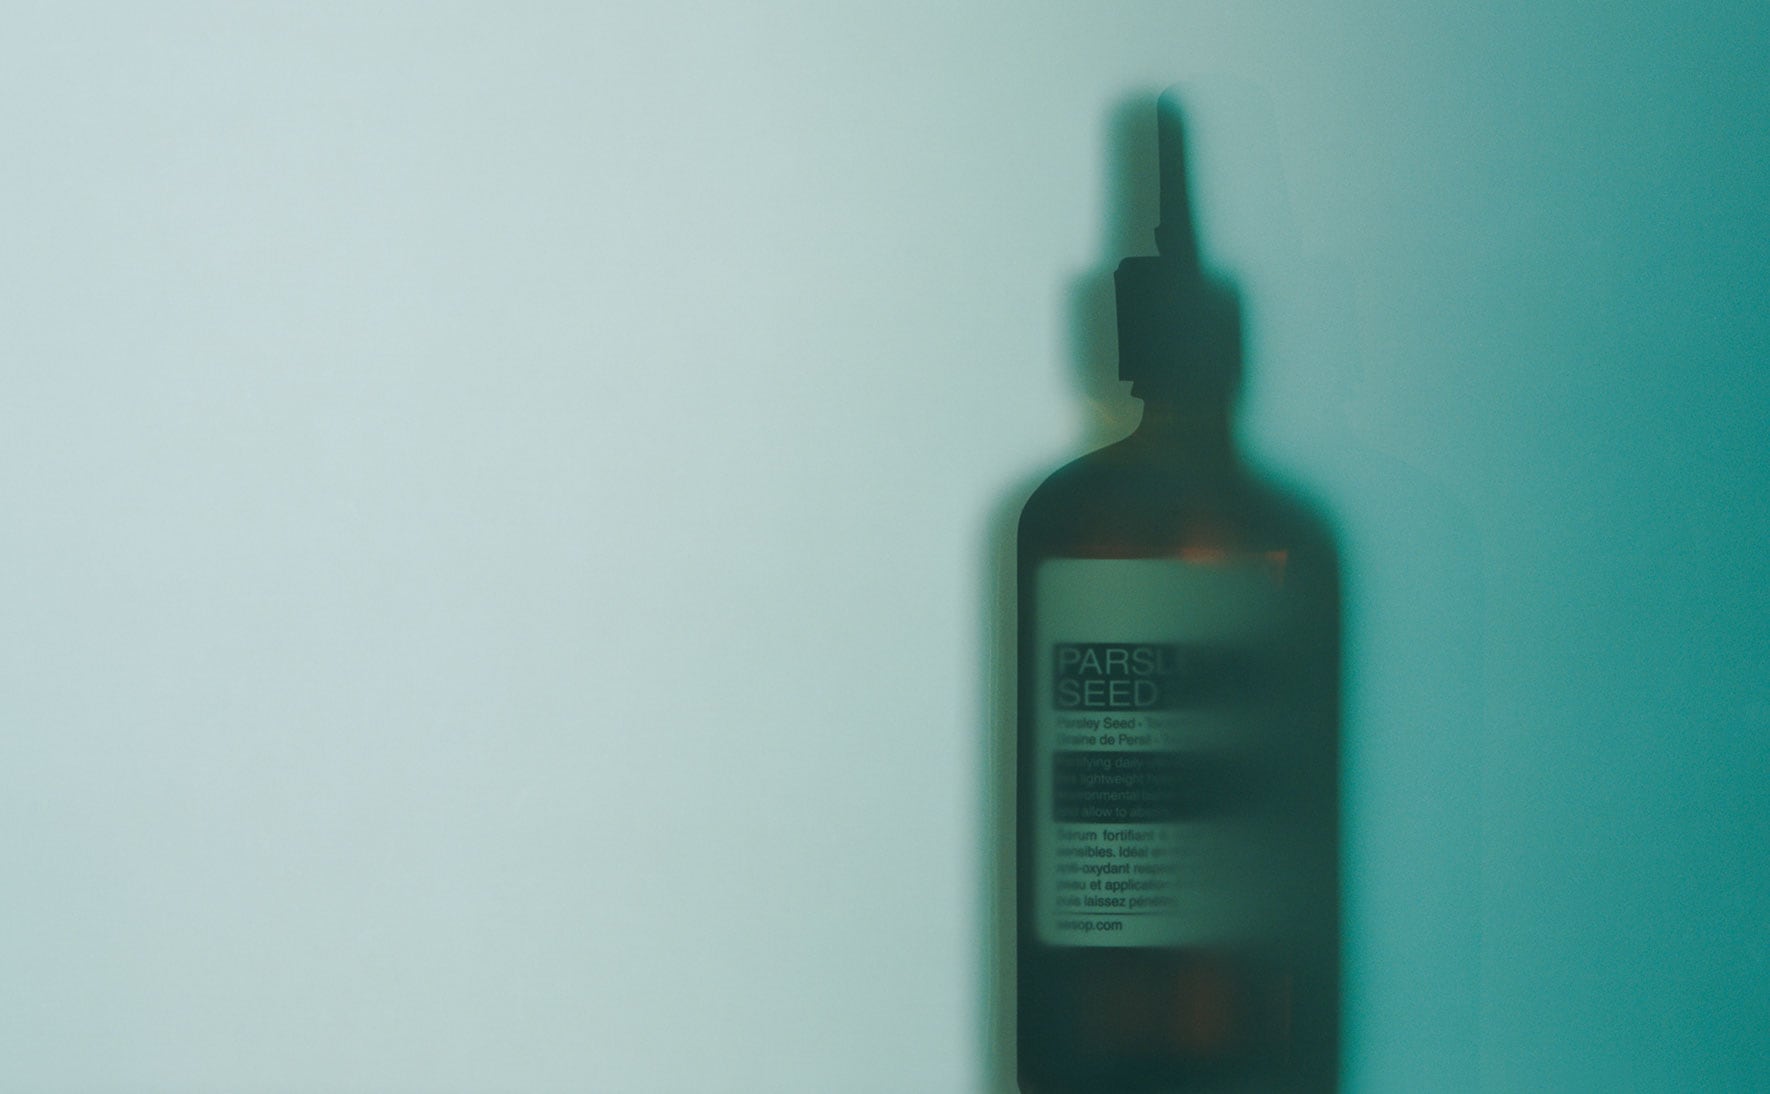 Aesop Parsley Seed Anti-Oxidant Intense Serum bottle placed in front of cyan background